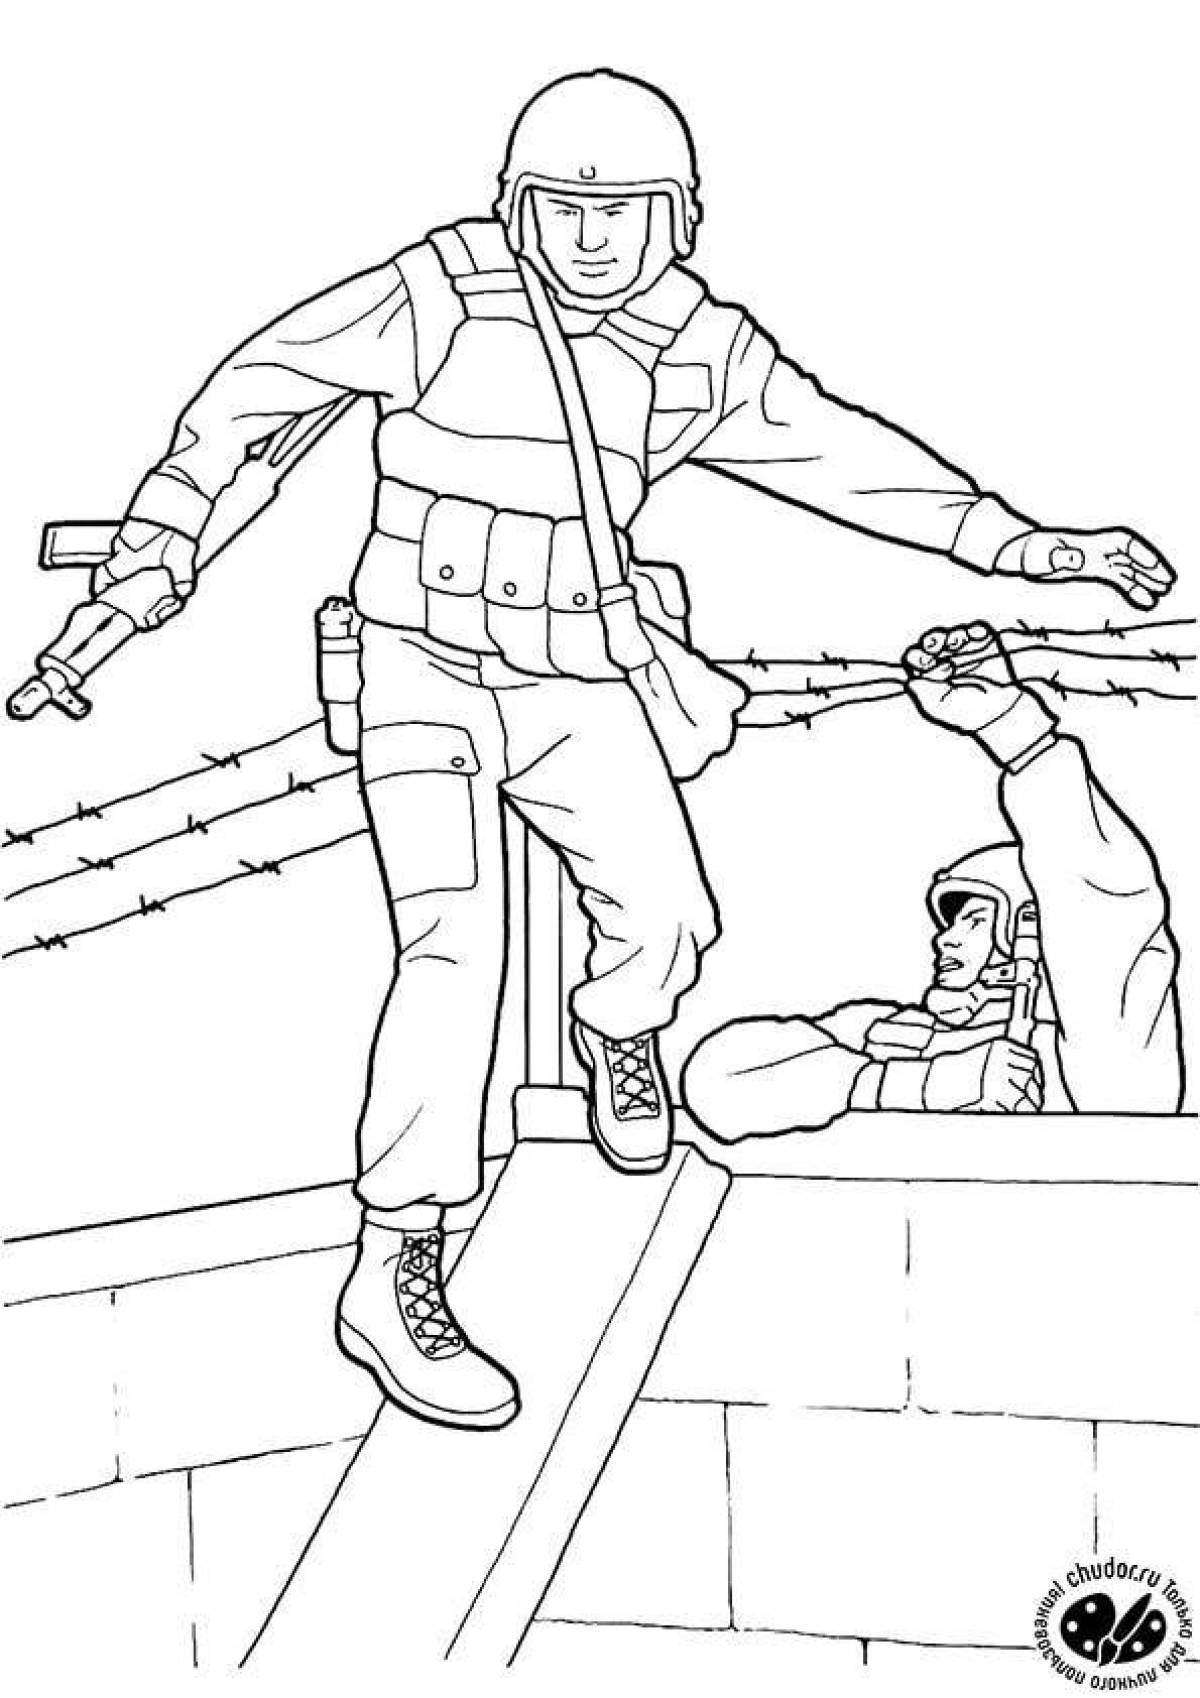 Wonderful special forces coloring pages for kids